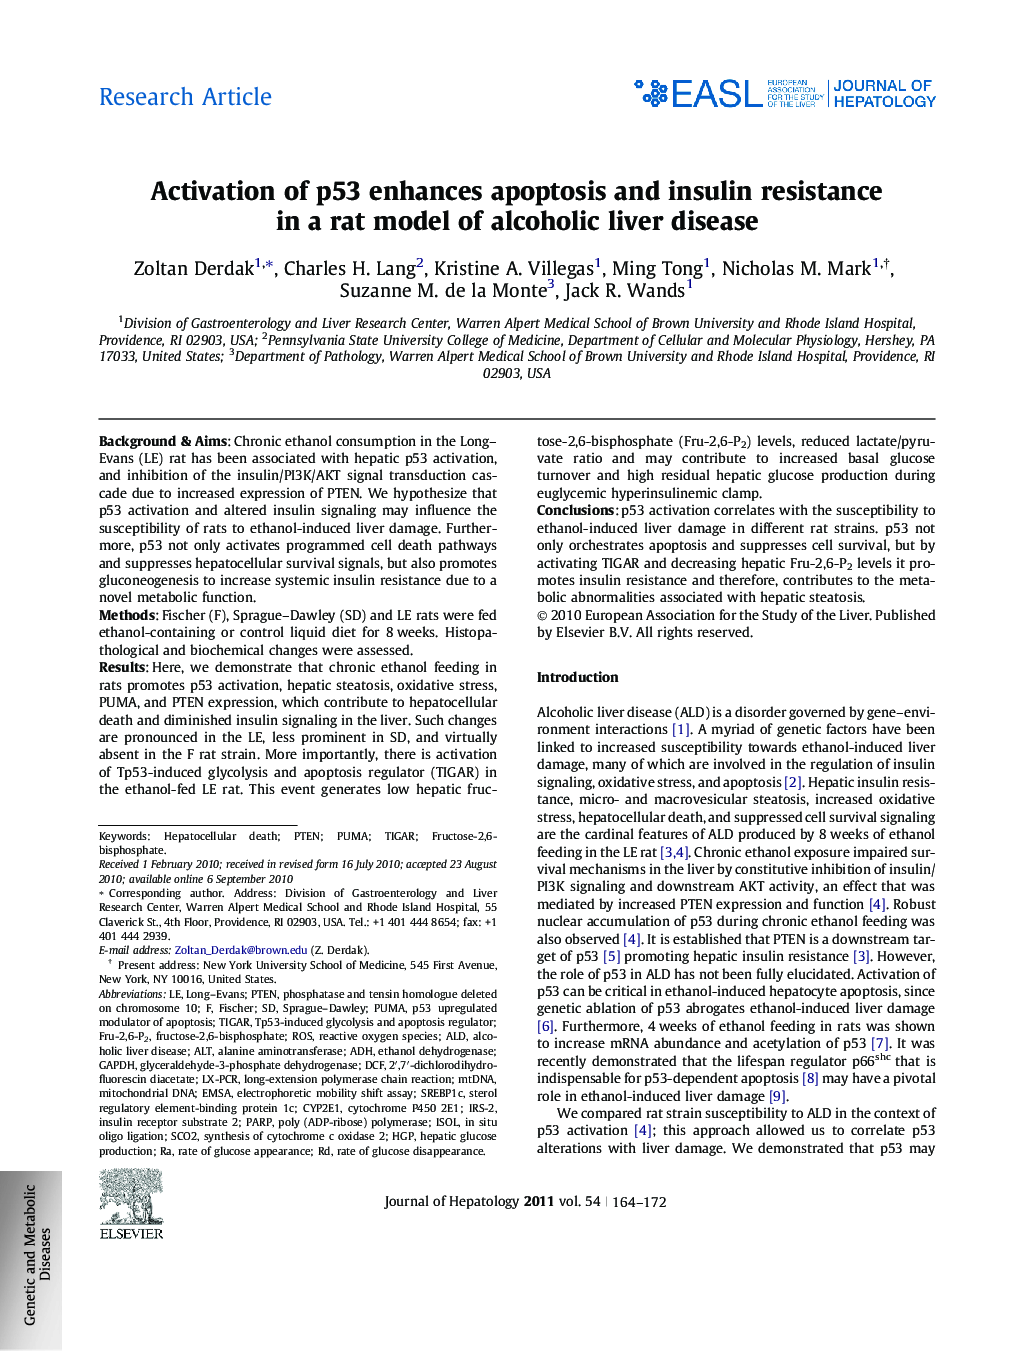 Research ArticleActivation of p53 enhances apoptosis and insulin resistance in a rat model of alcoholic liver disease